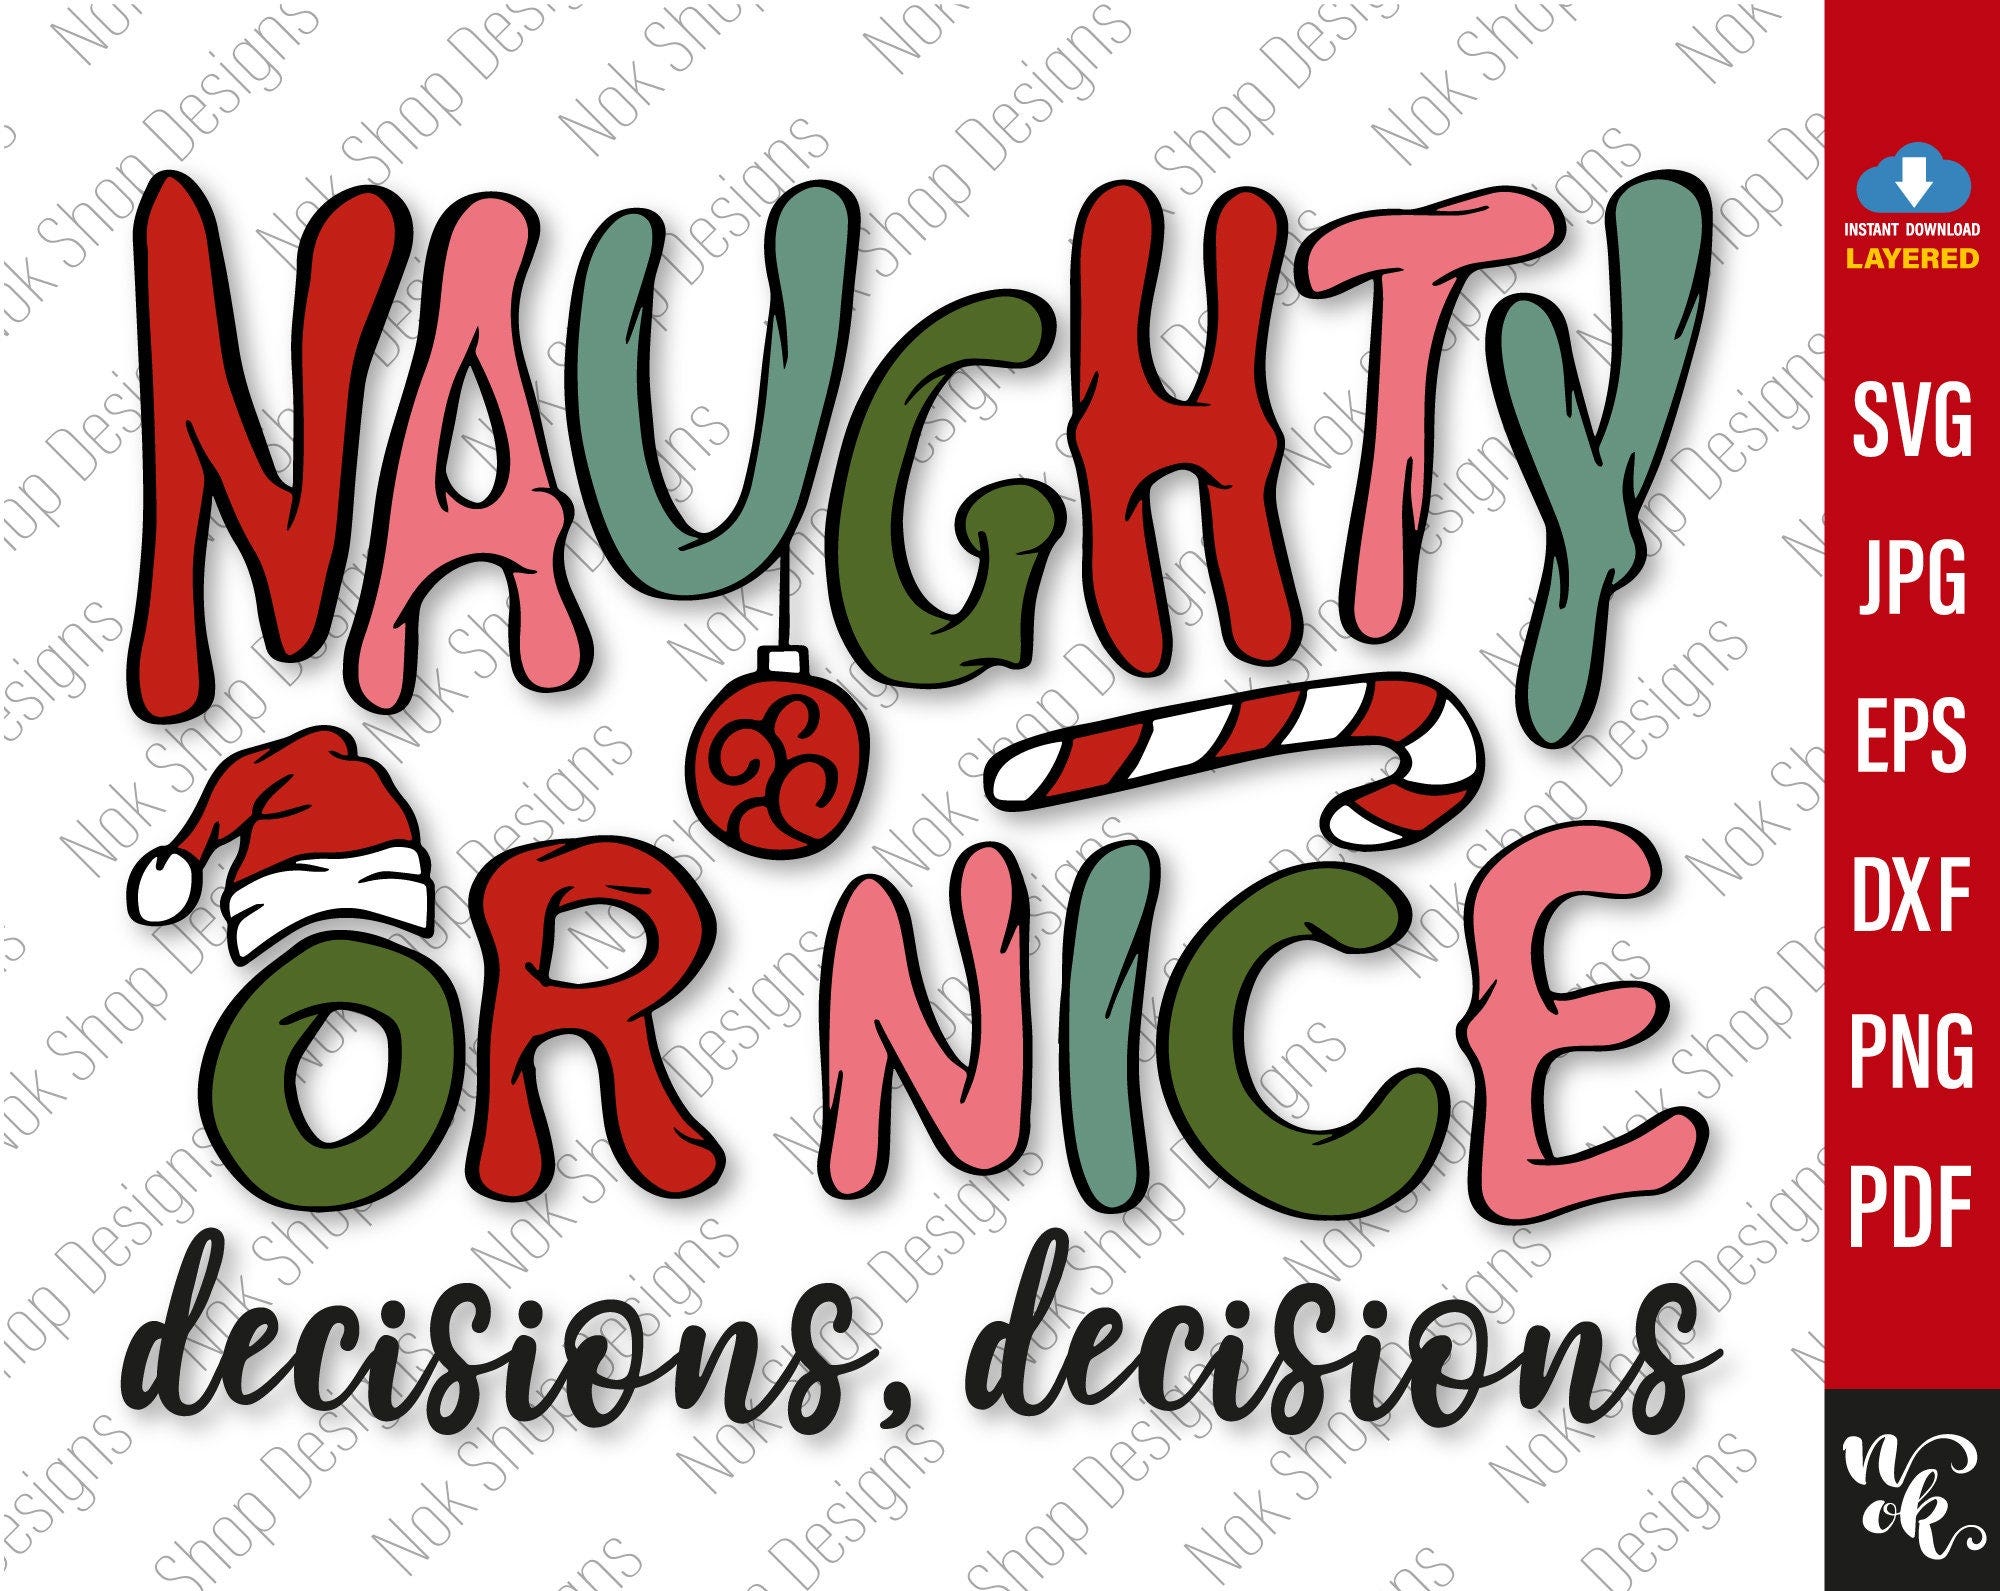 Naughty or Nice Svg, Decisions, Funny Christmas png, Xmas cut file for Cricut Silhouette cameo, PNG sublimation print.